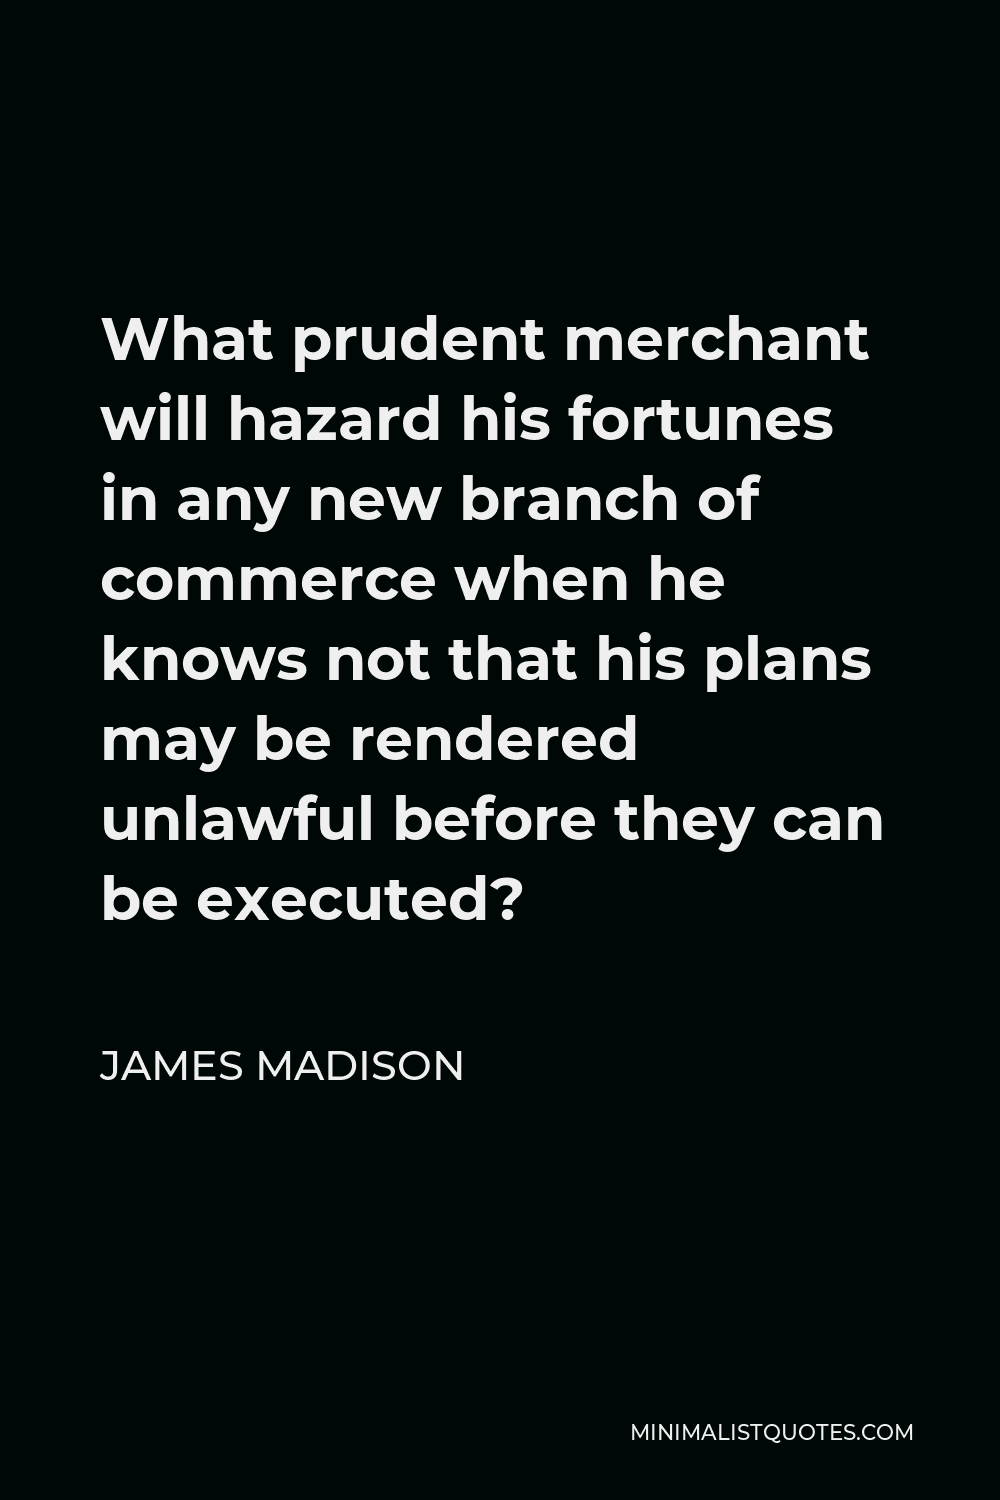 James Madison Quote - What prudent merchant will hazard his fortunes in any new branch of commerce when he knows not that his plans may be rendered unlawful before they can be executed?